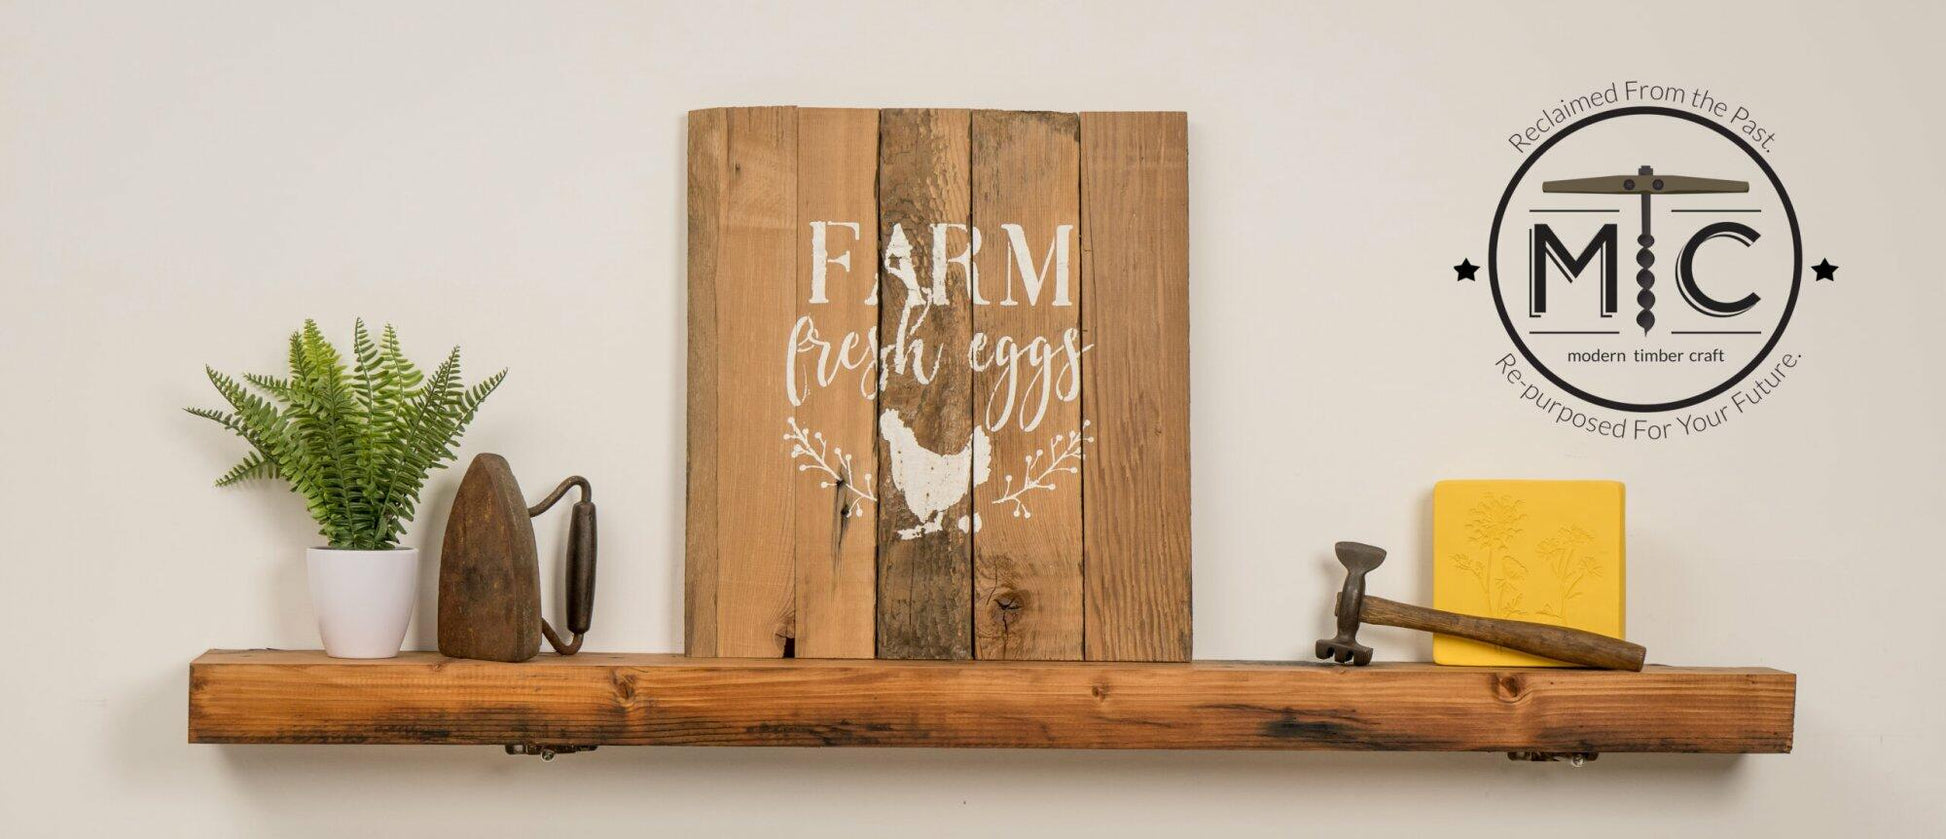 stamped paint design centered on natural and reclaimed barnwood strips put together to create a sign. Design reads Farm Fresh Eggs with a chicken laying an egg underneath underneath and simple florals on either side of the chicken. Wood has distressed characteristics. Shown on a skip planed, oiled mantel with decor items on either side.